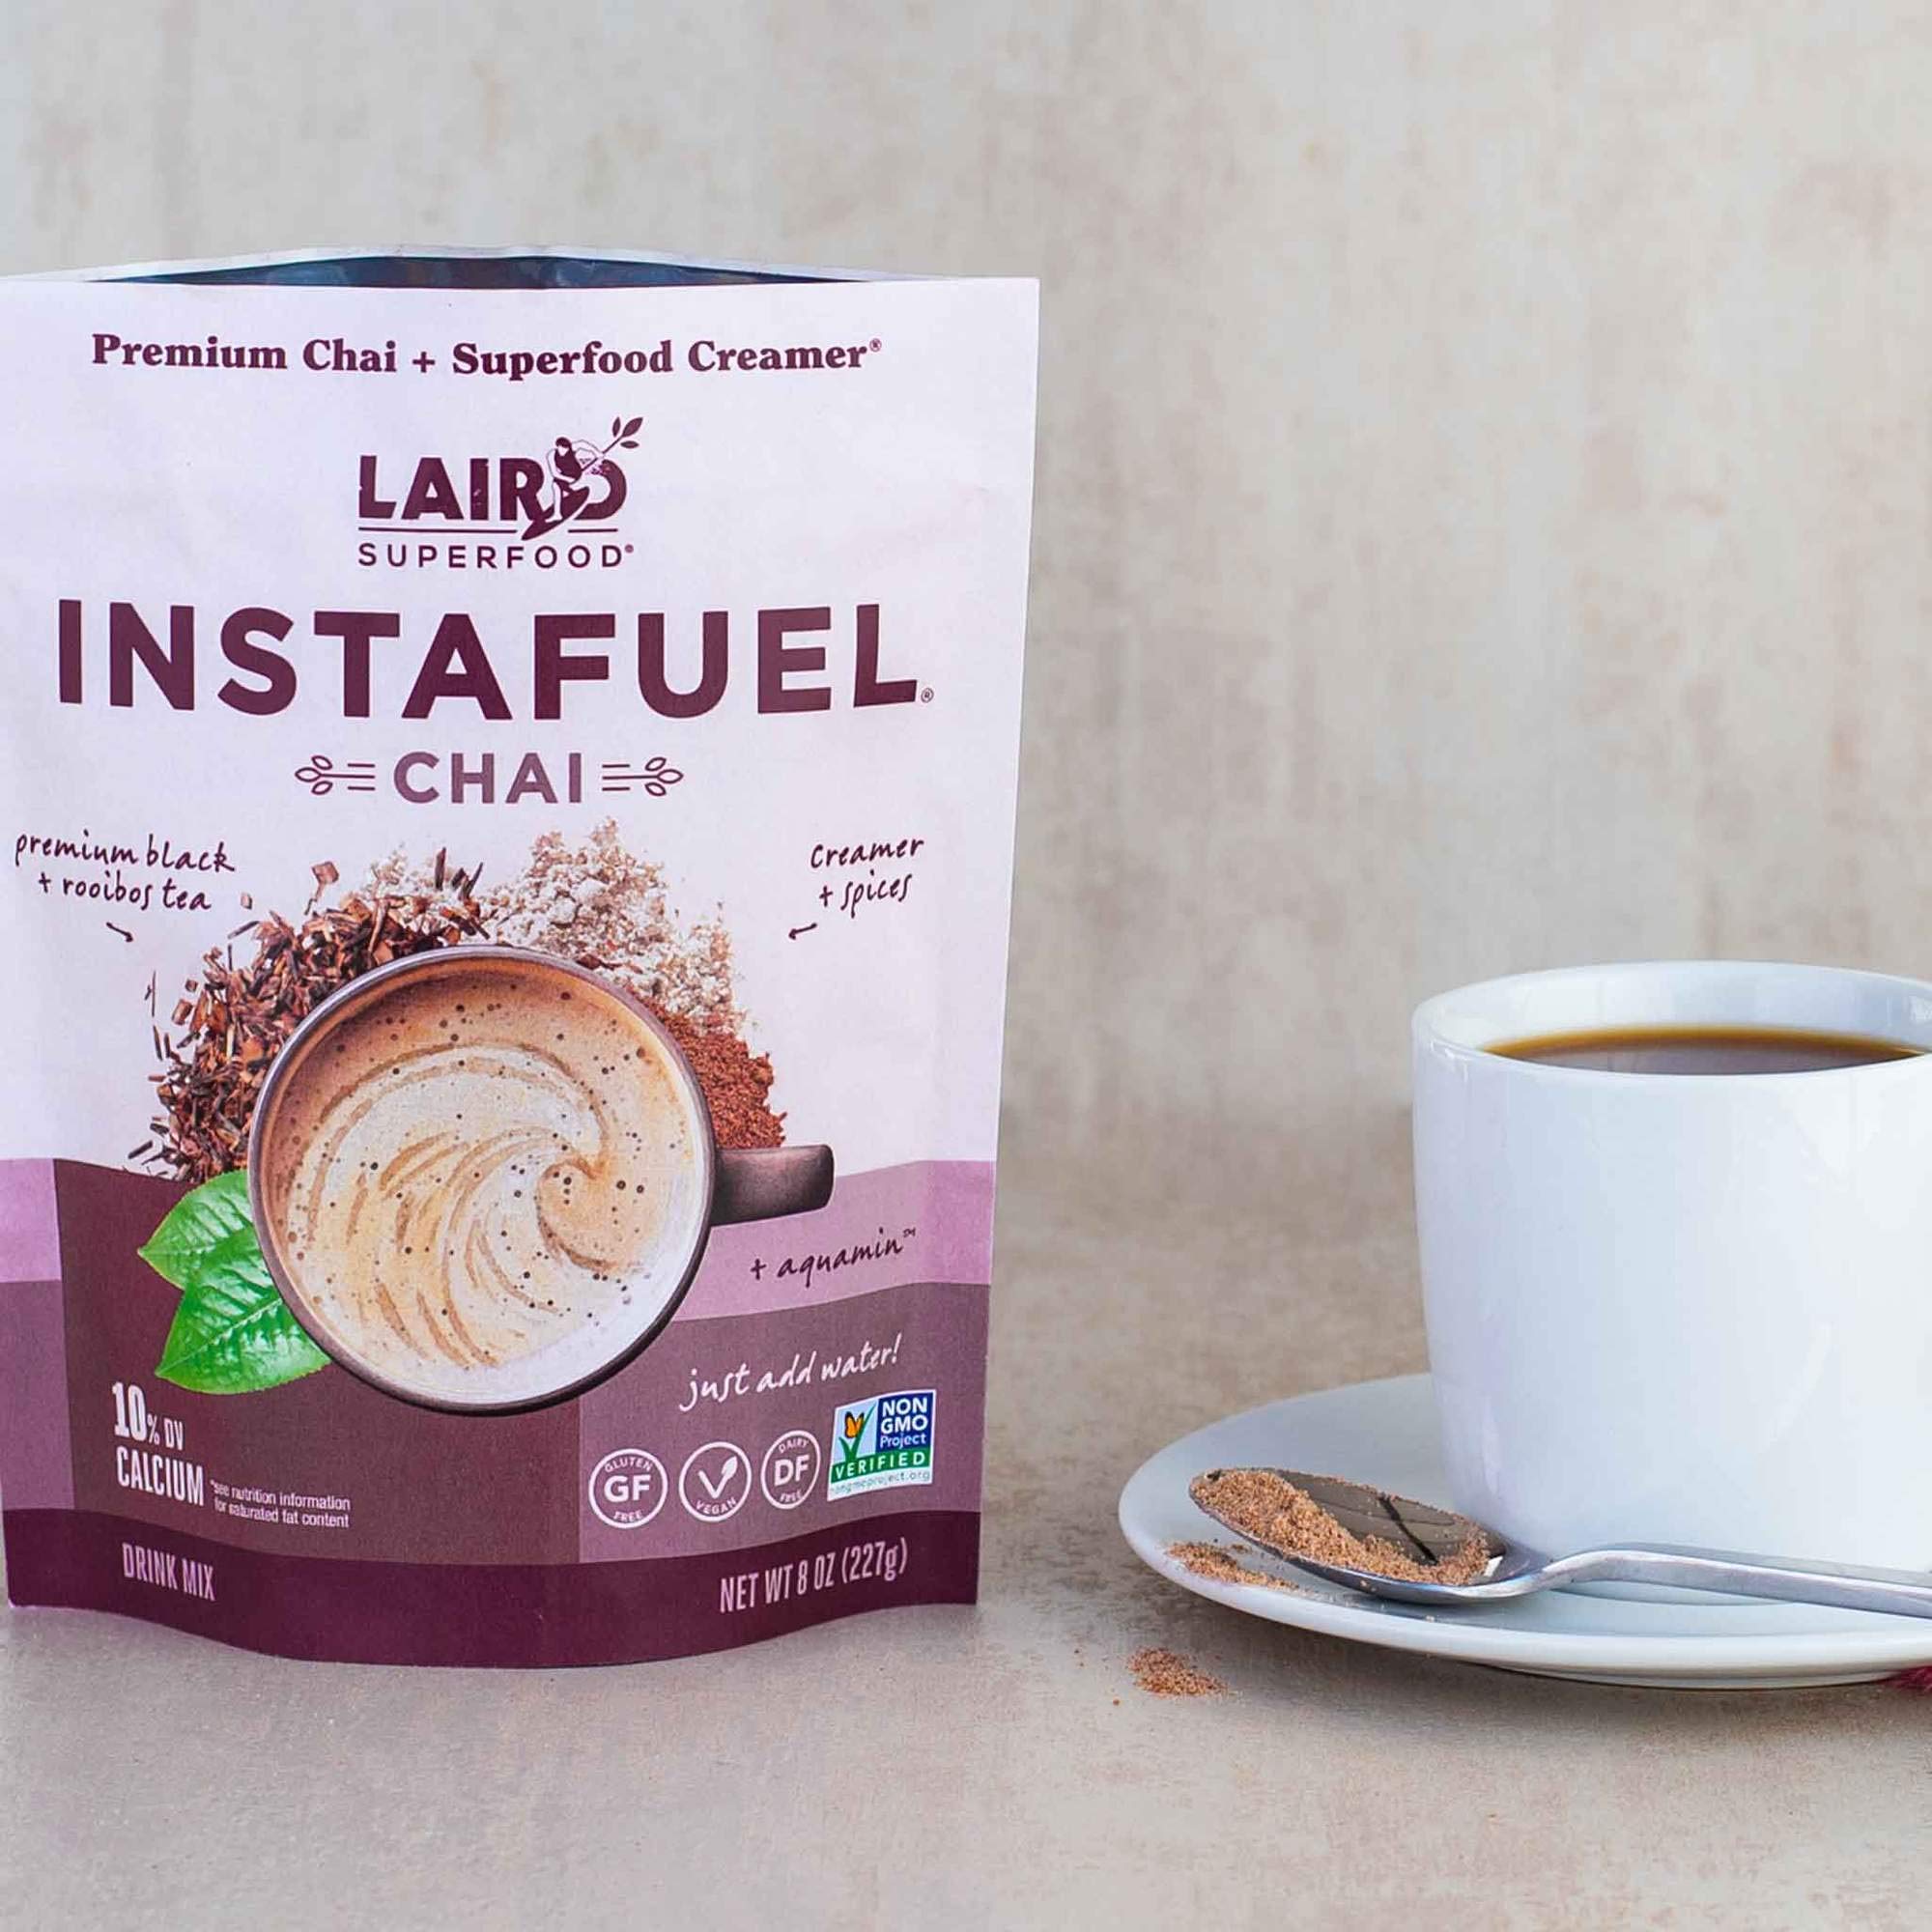 Laird Superfood Instafuel Chai Latte Powder - Delicious Mix of Instant Chai Tea and Our Original Superfood Non-Dairy Creamer, 8oz Bag - image 3 of 5